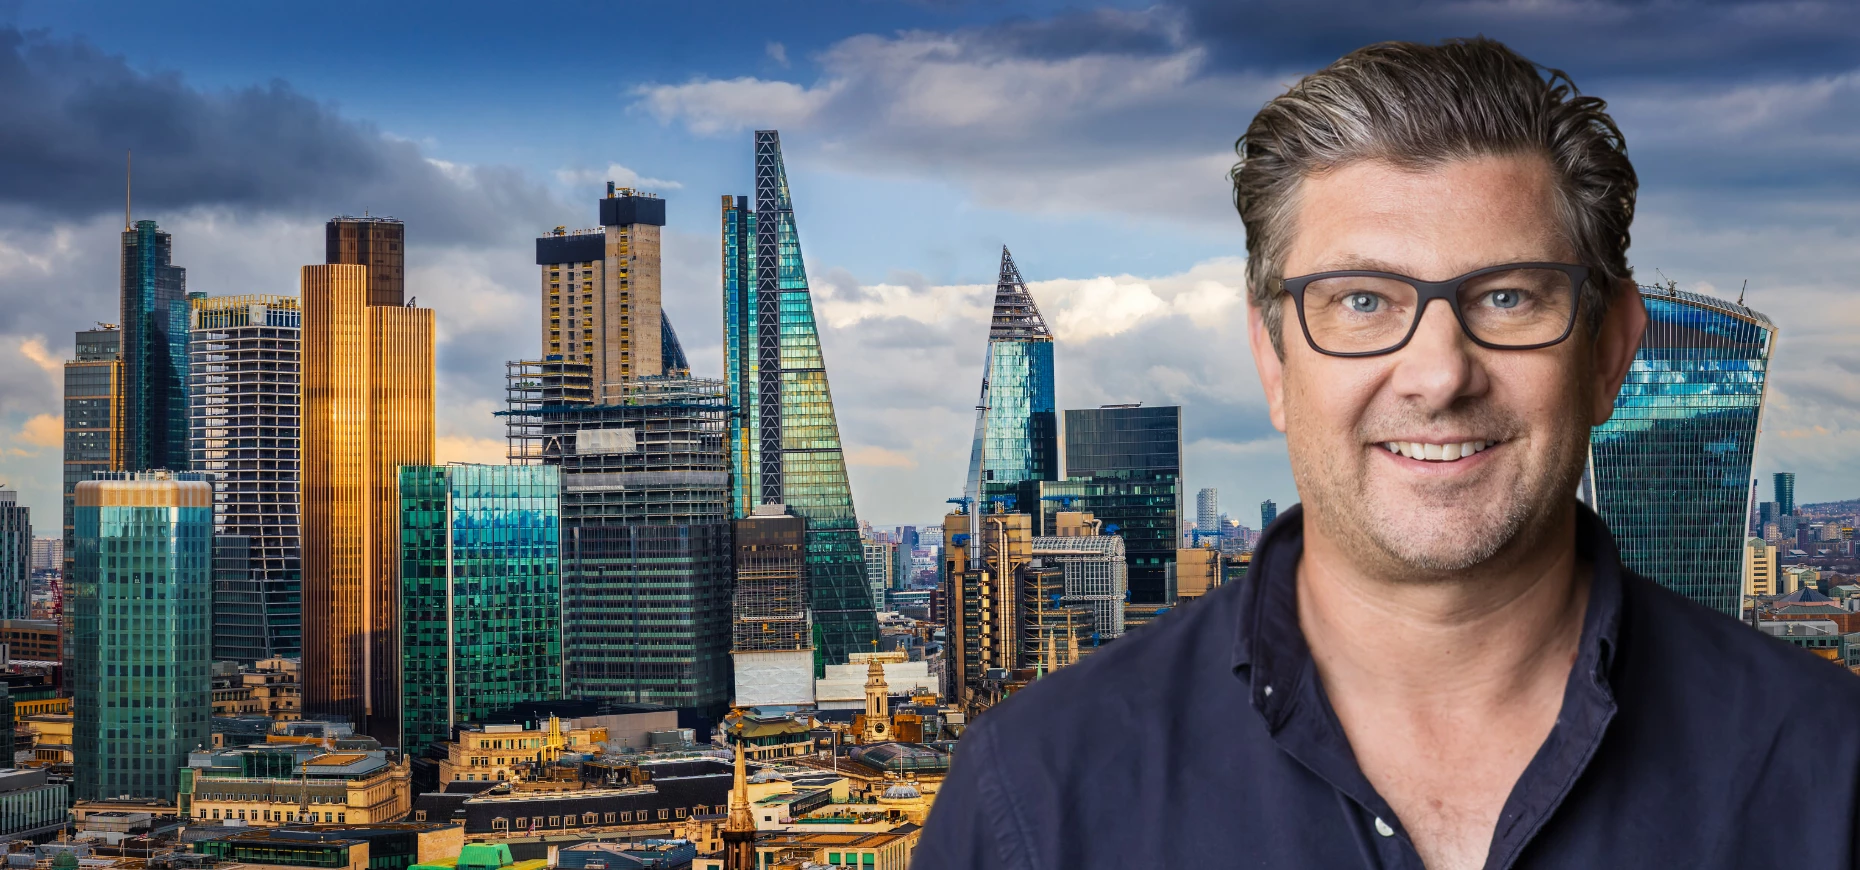 Ben Thompson, CEO & Founder of Employment Hero, pictured against the London skyline.